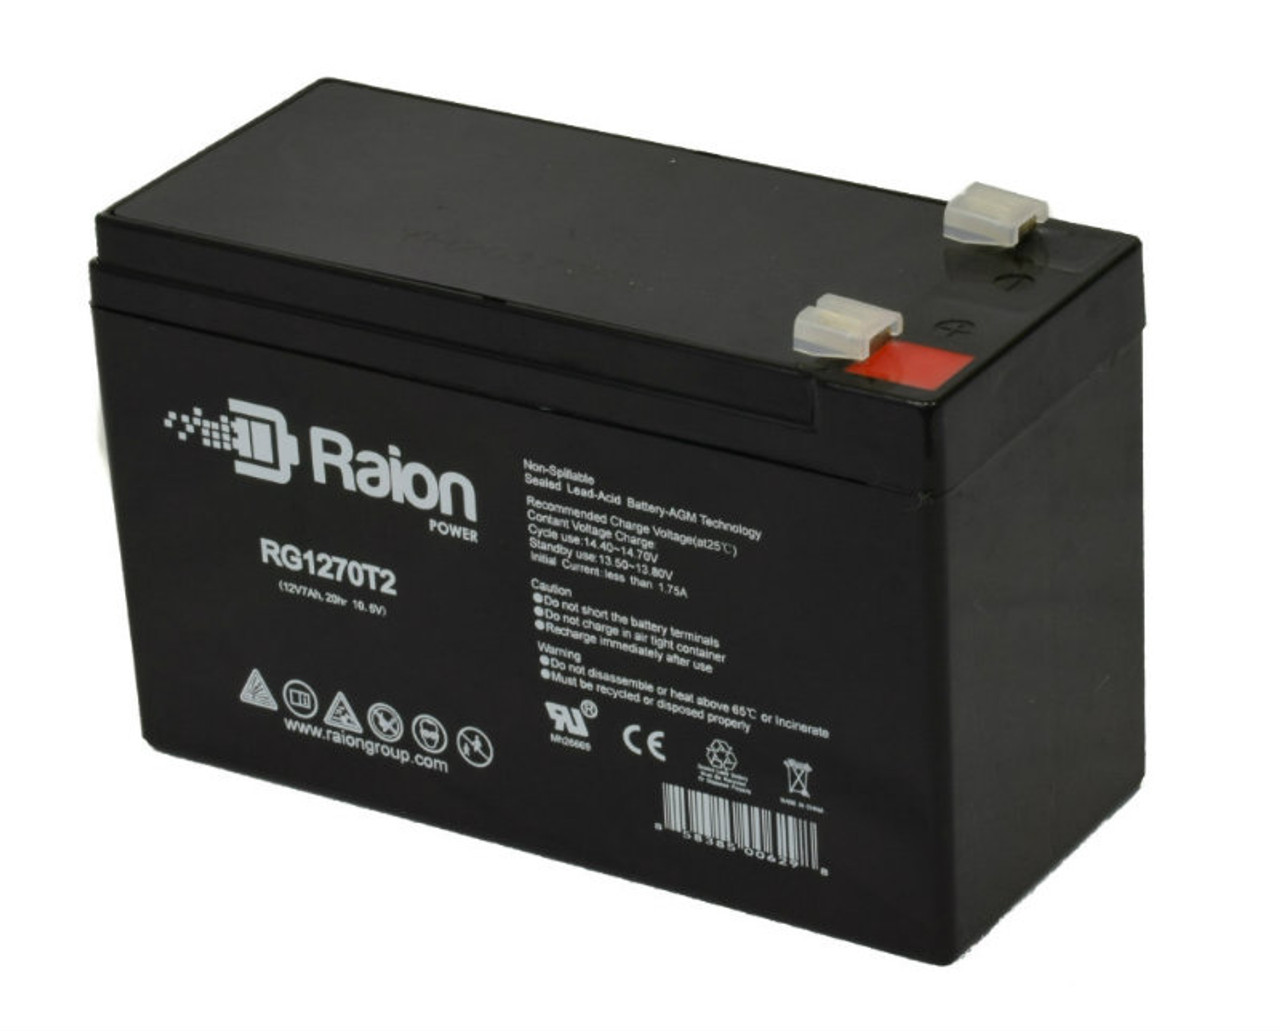 Raion Power Replacement 12V 7Ah RG1270T1 Fire Alarm Battery for Digital Security Power632 (Option 2)